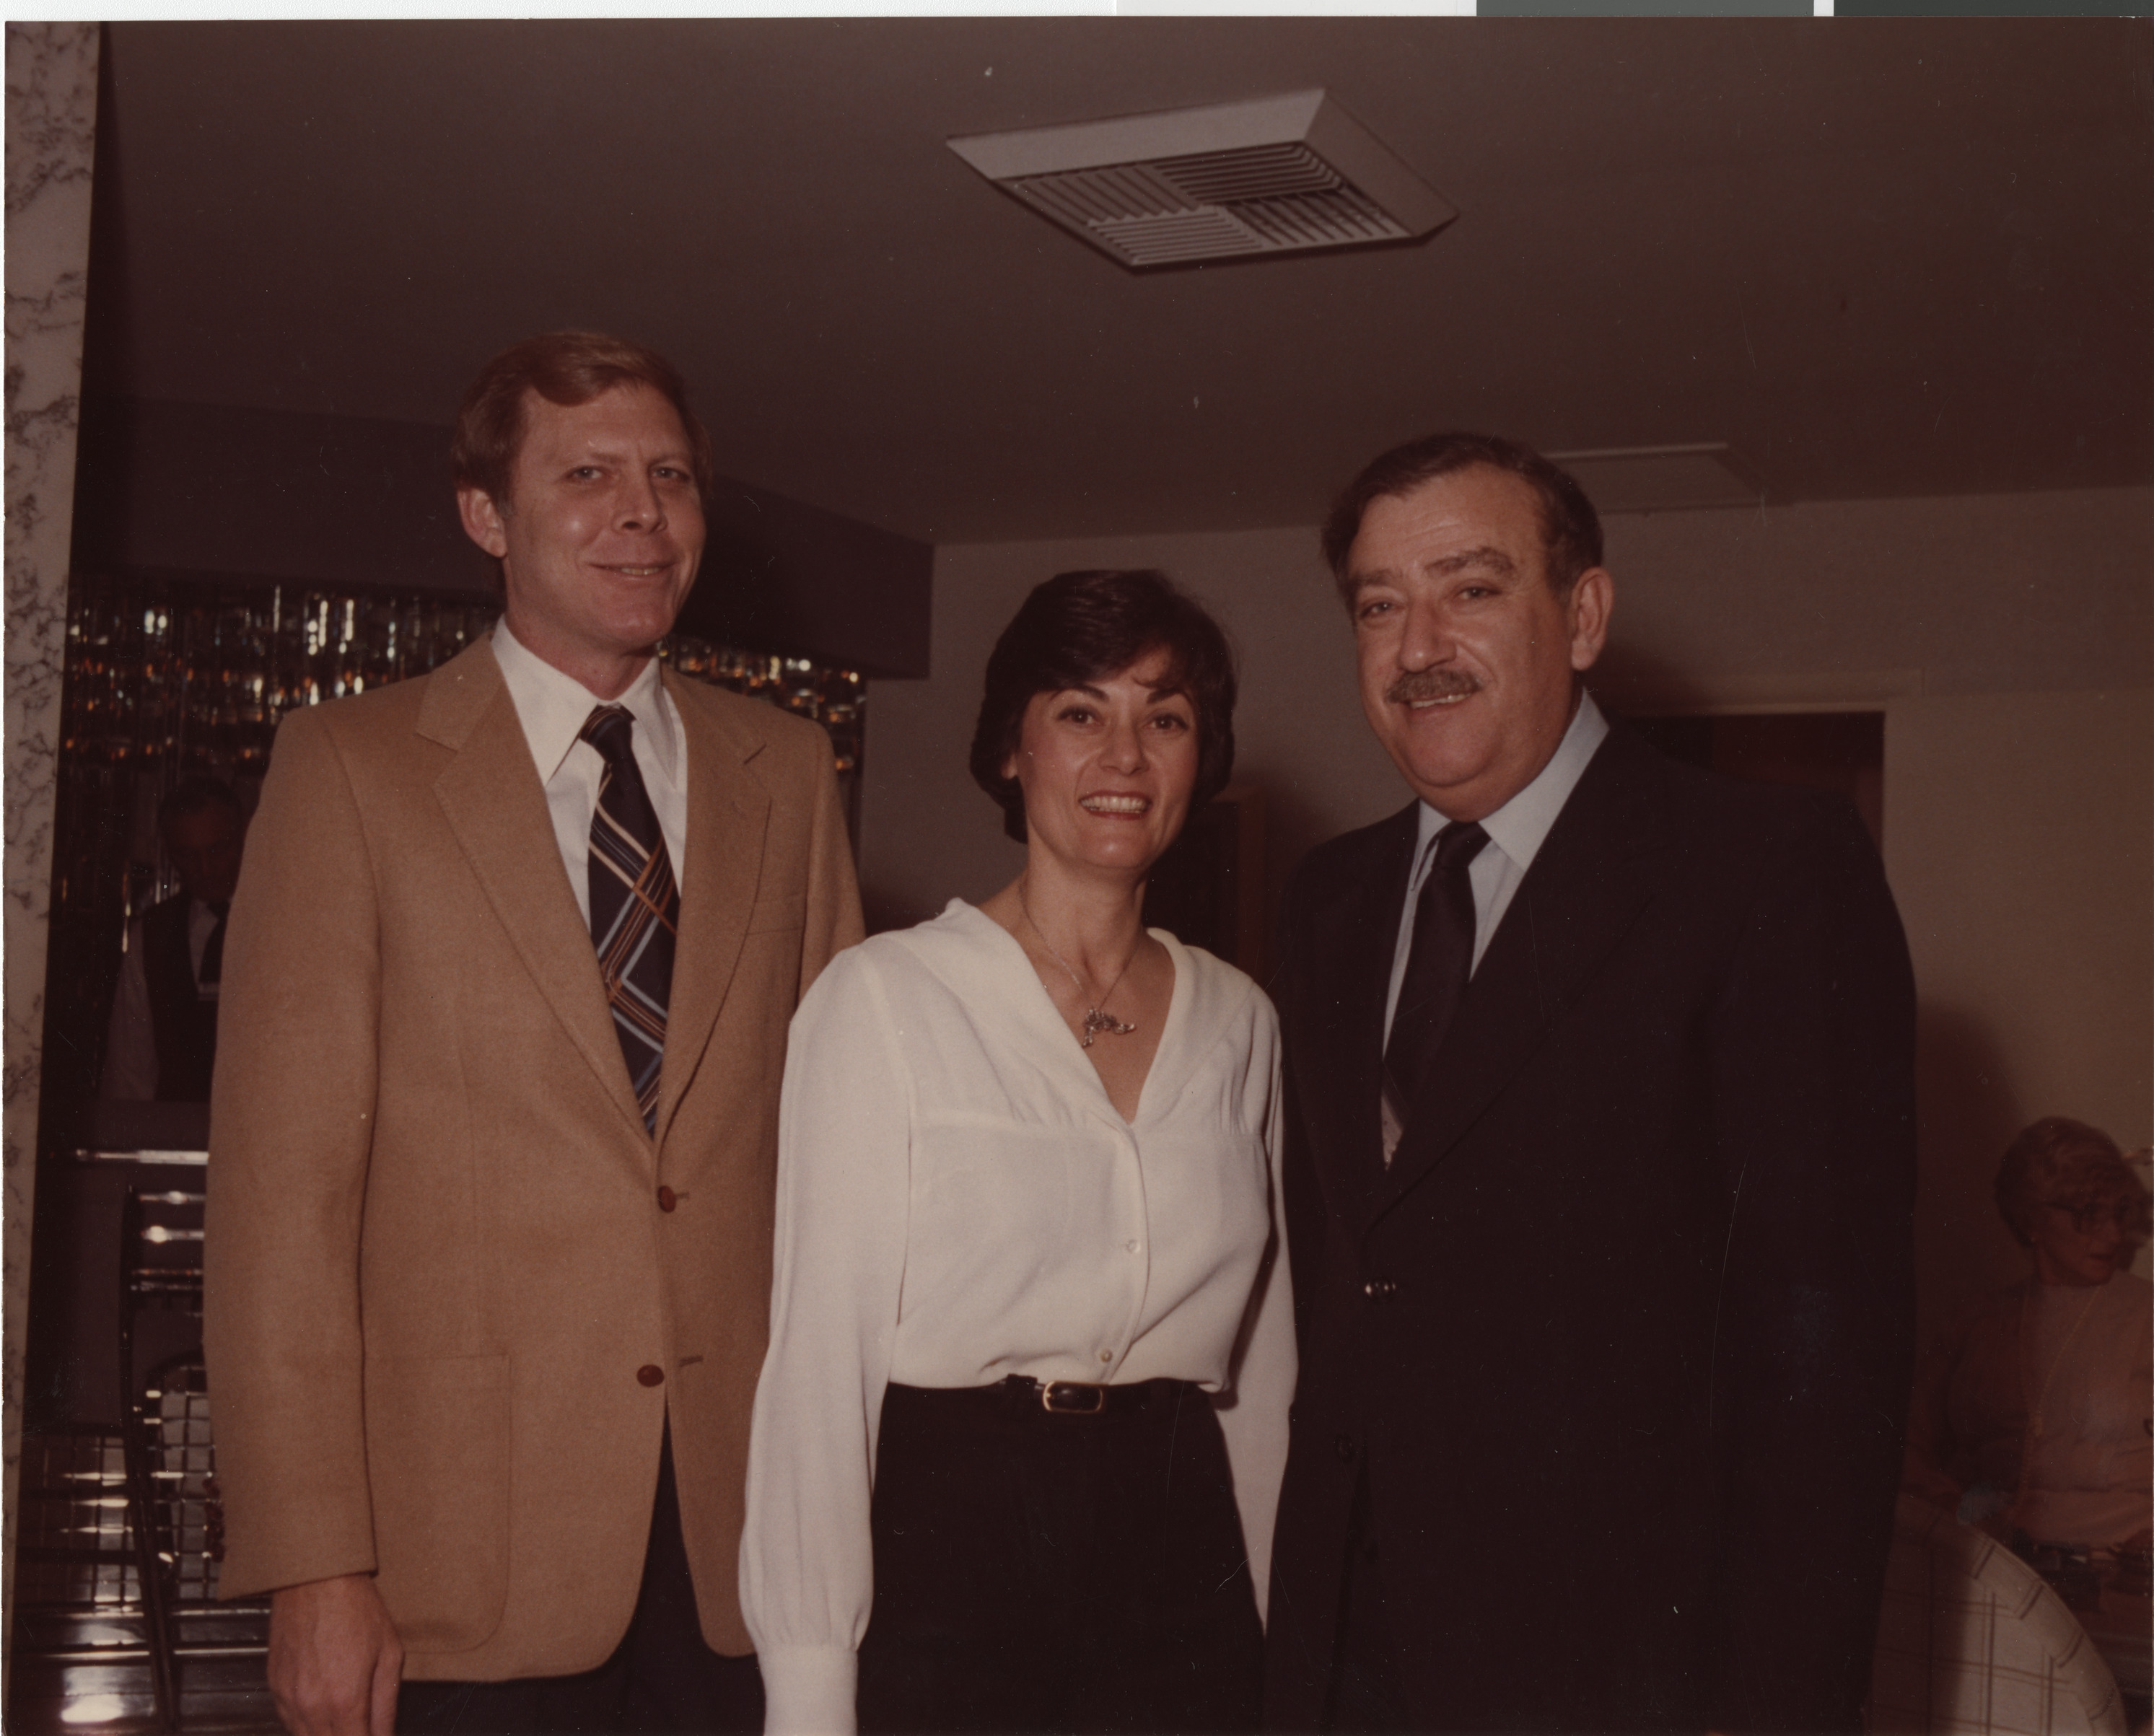 Photograph of Stuart and Flora Mason with Simcha Dinitz of Israel at the home of Art and Jayne Marshall, Fall 1981